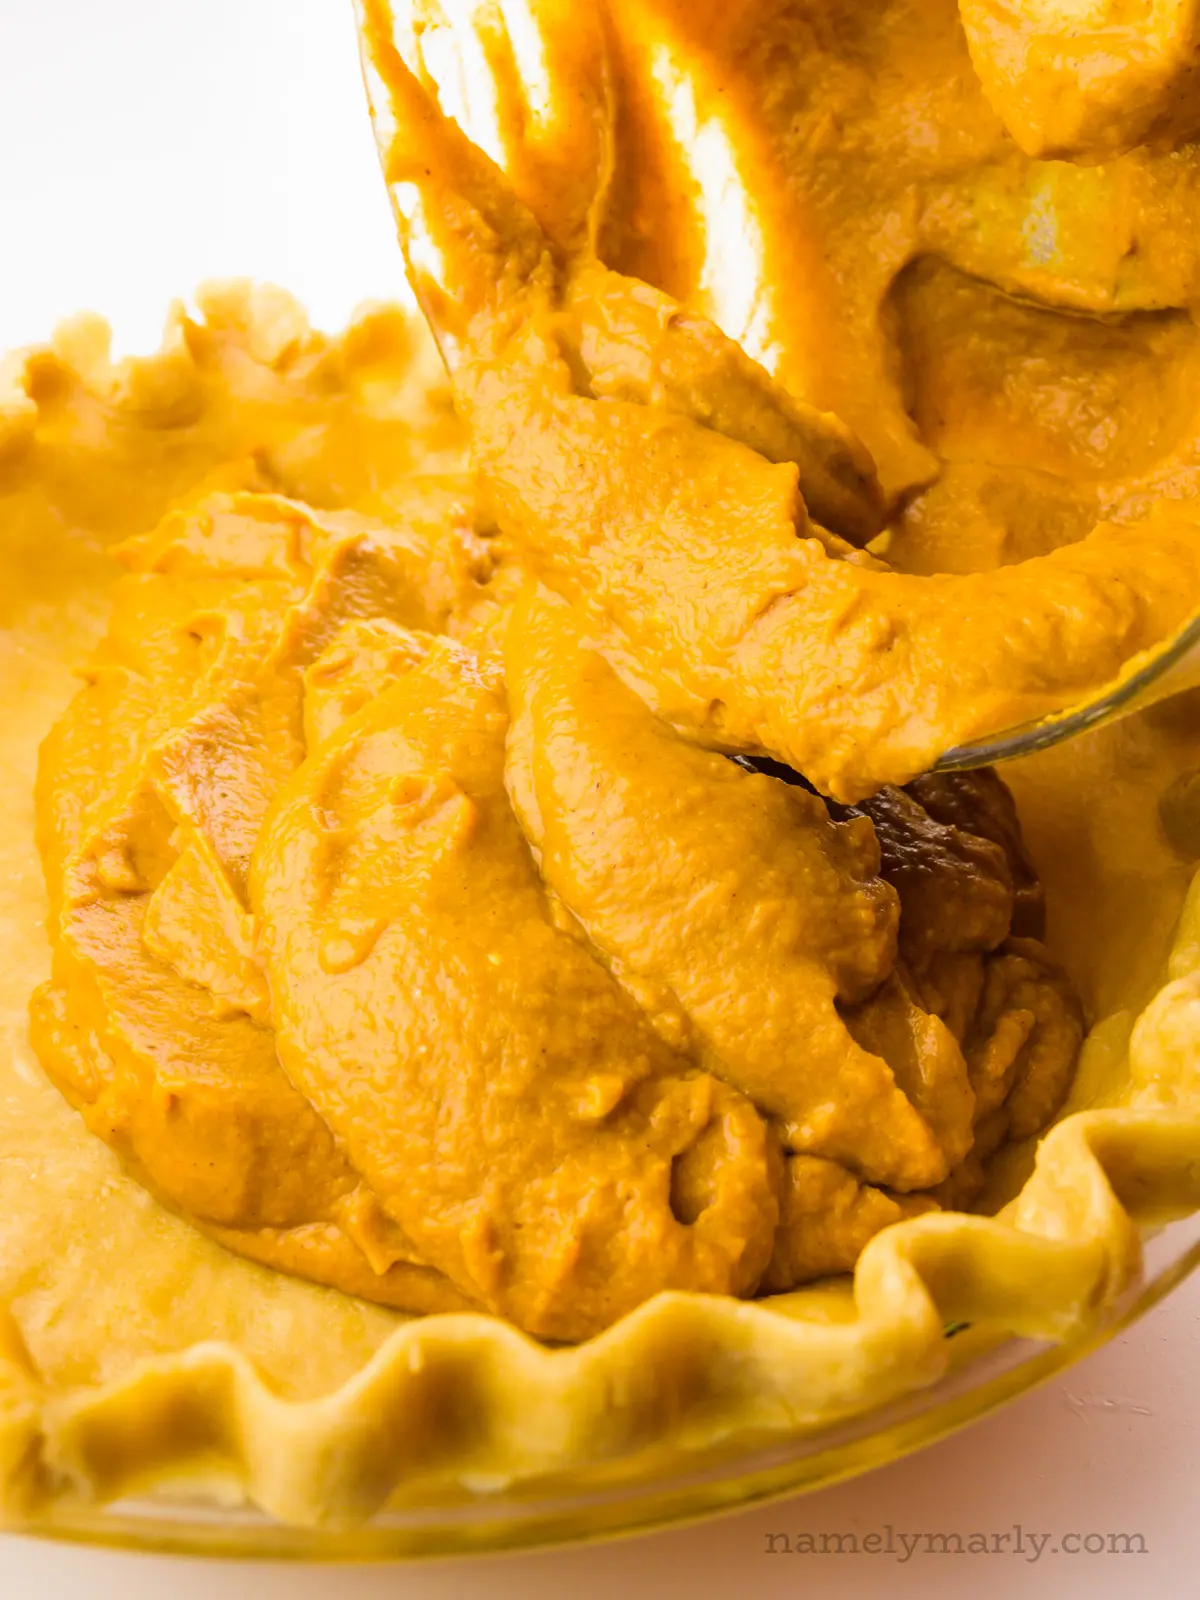 Pumpkin filling is being poured into an unbaked crust.